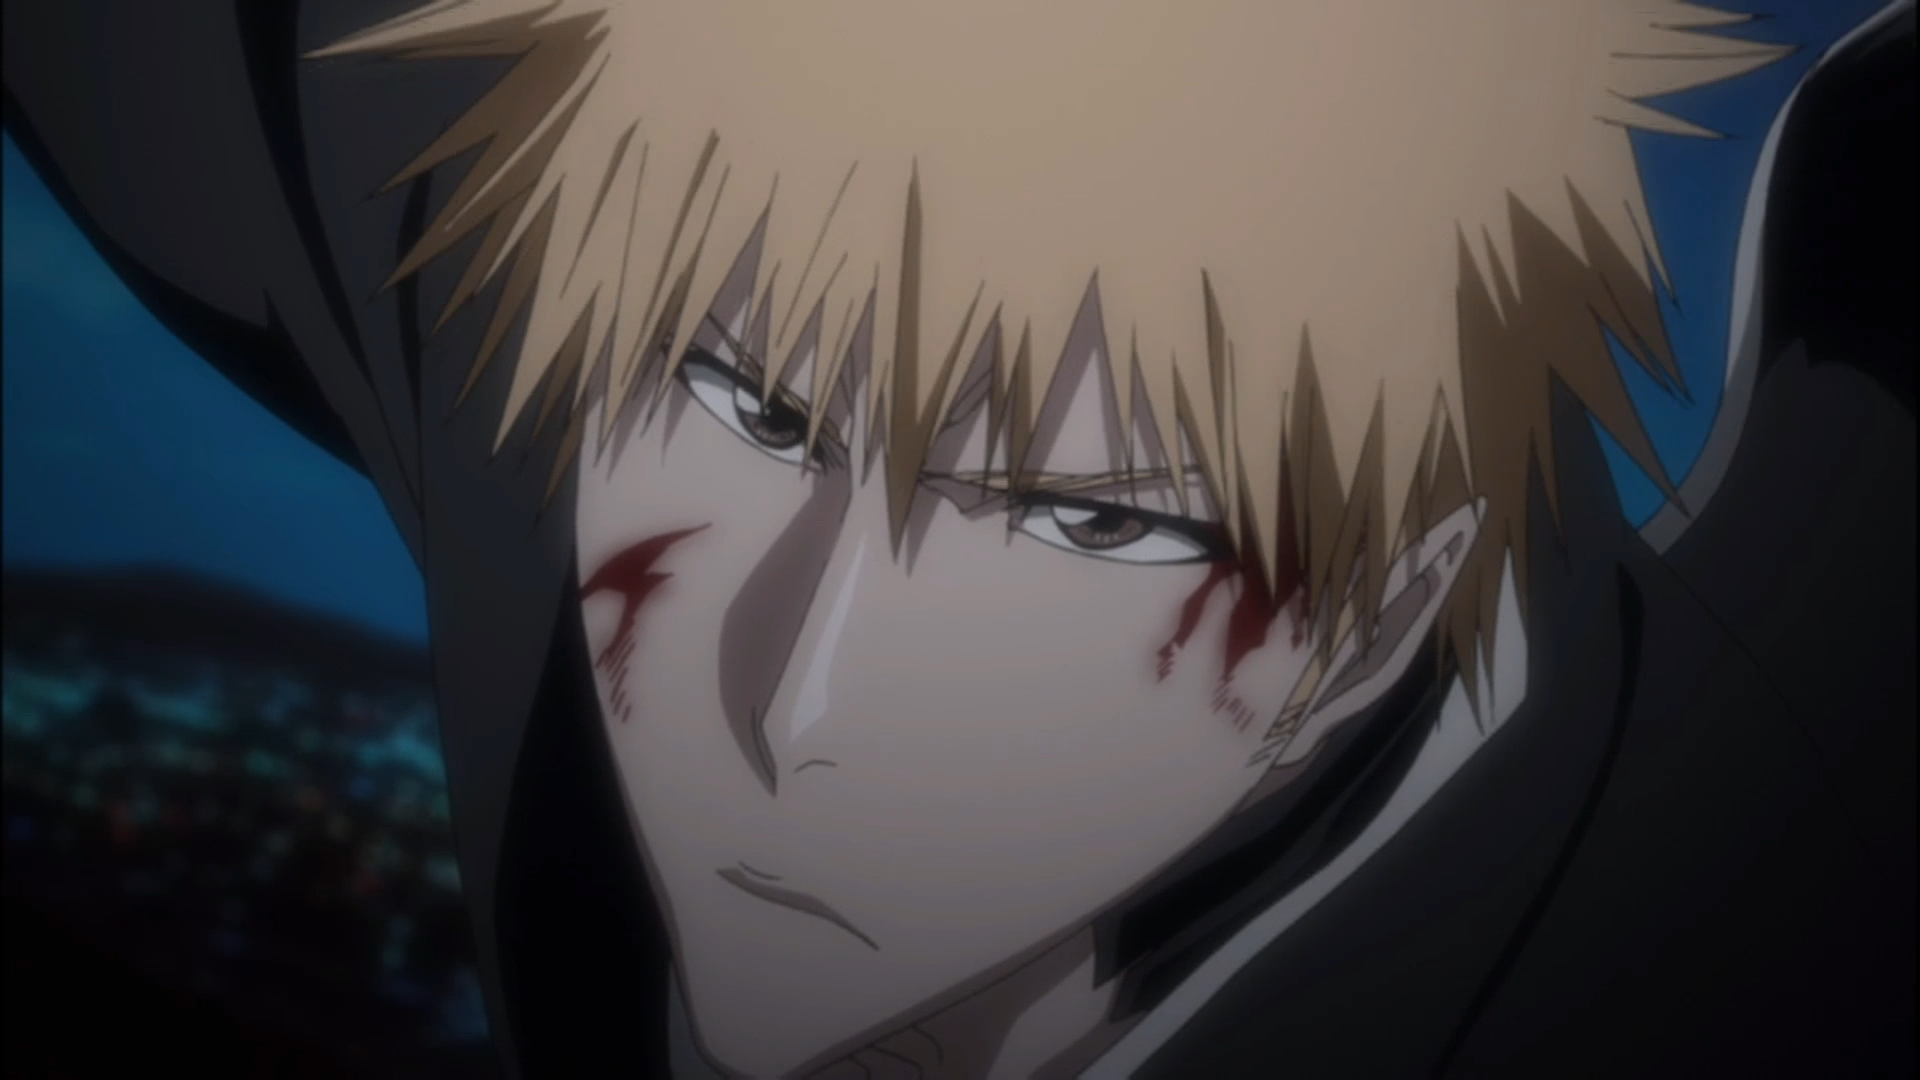 Mightypie anime blogs: Bleach fullbringer arc review - The good, the bad  and the Y U DO DIS KUBO!!!! PLOTKAI!!!